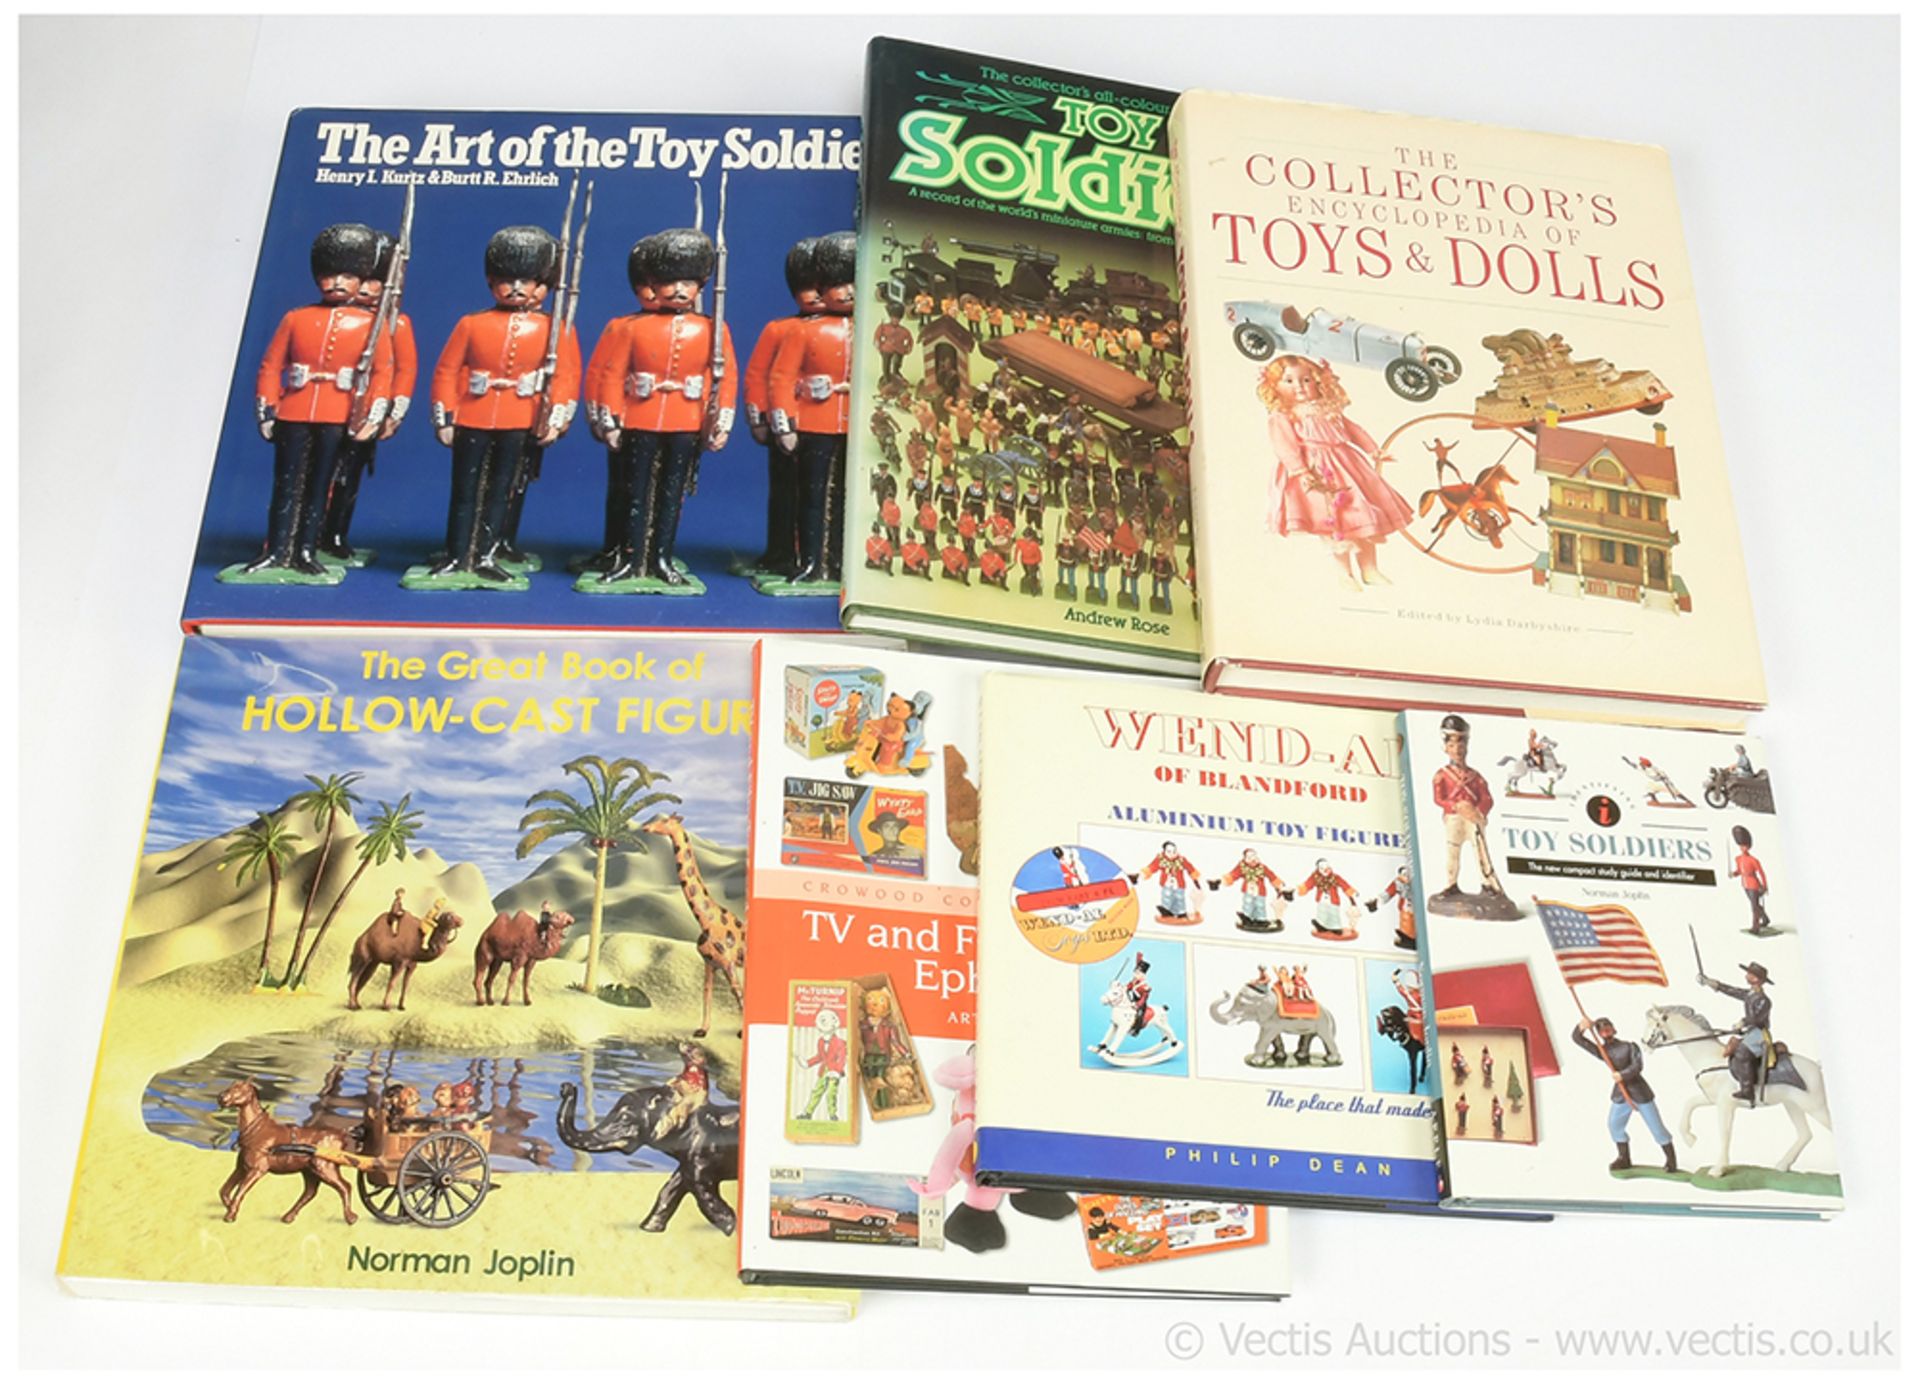 GRP inc Toy Soldier Books - "The Art of the Toy